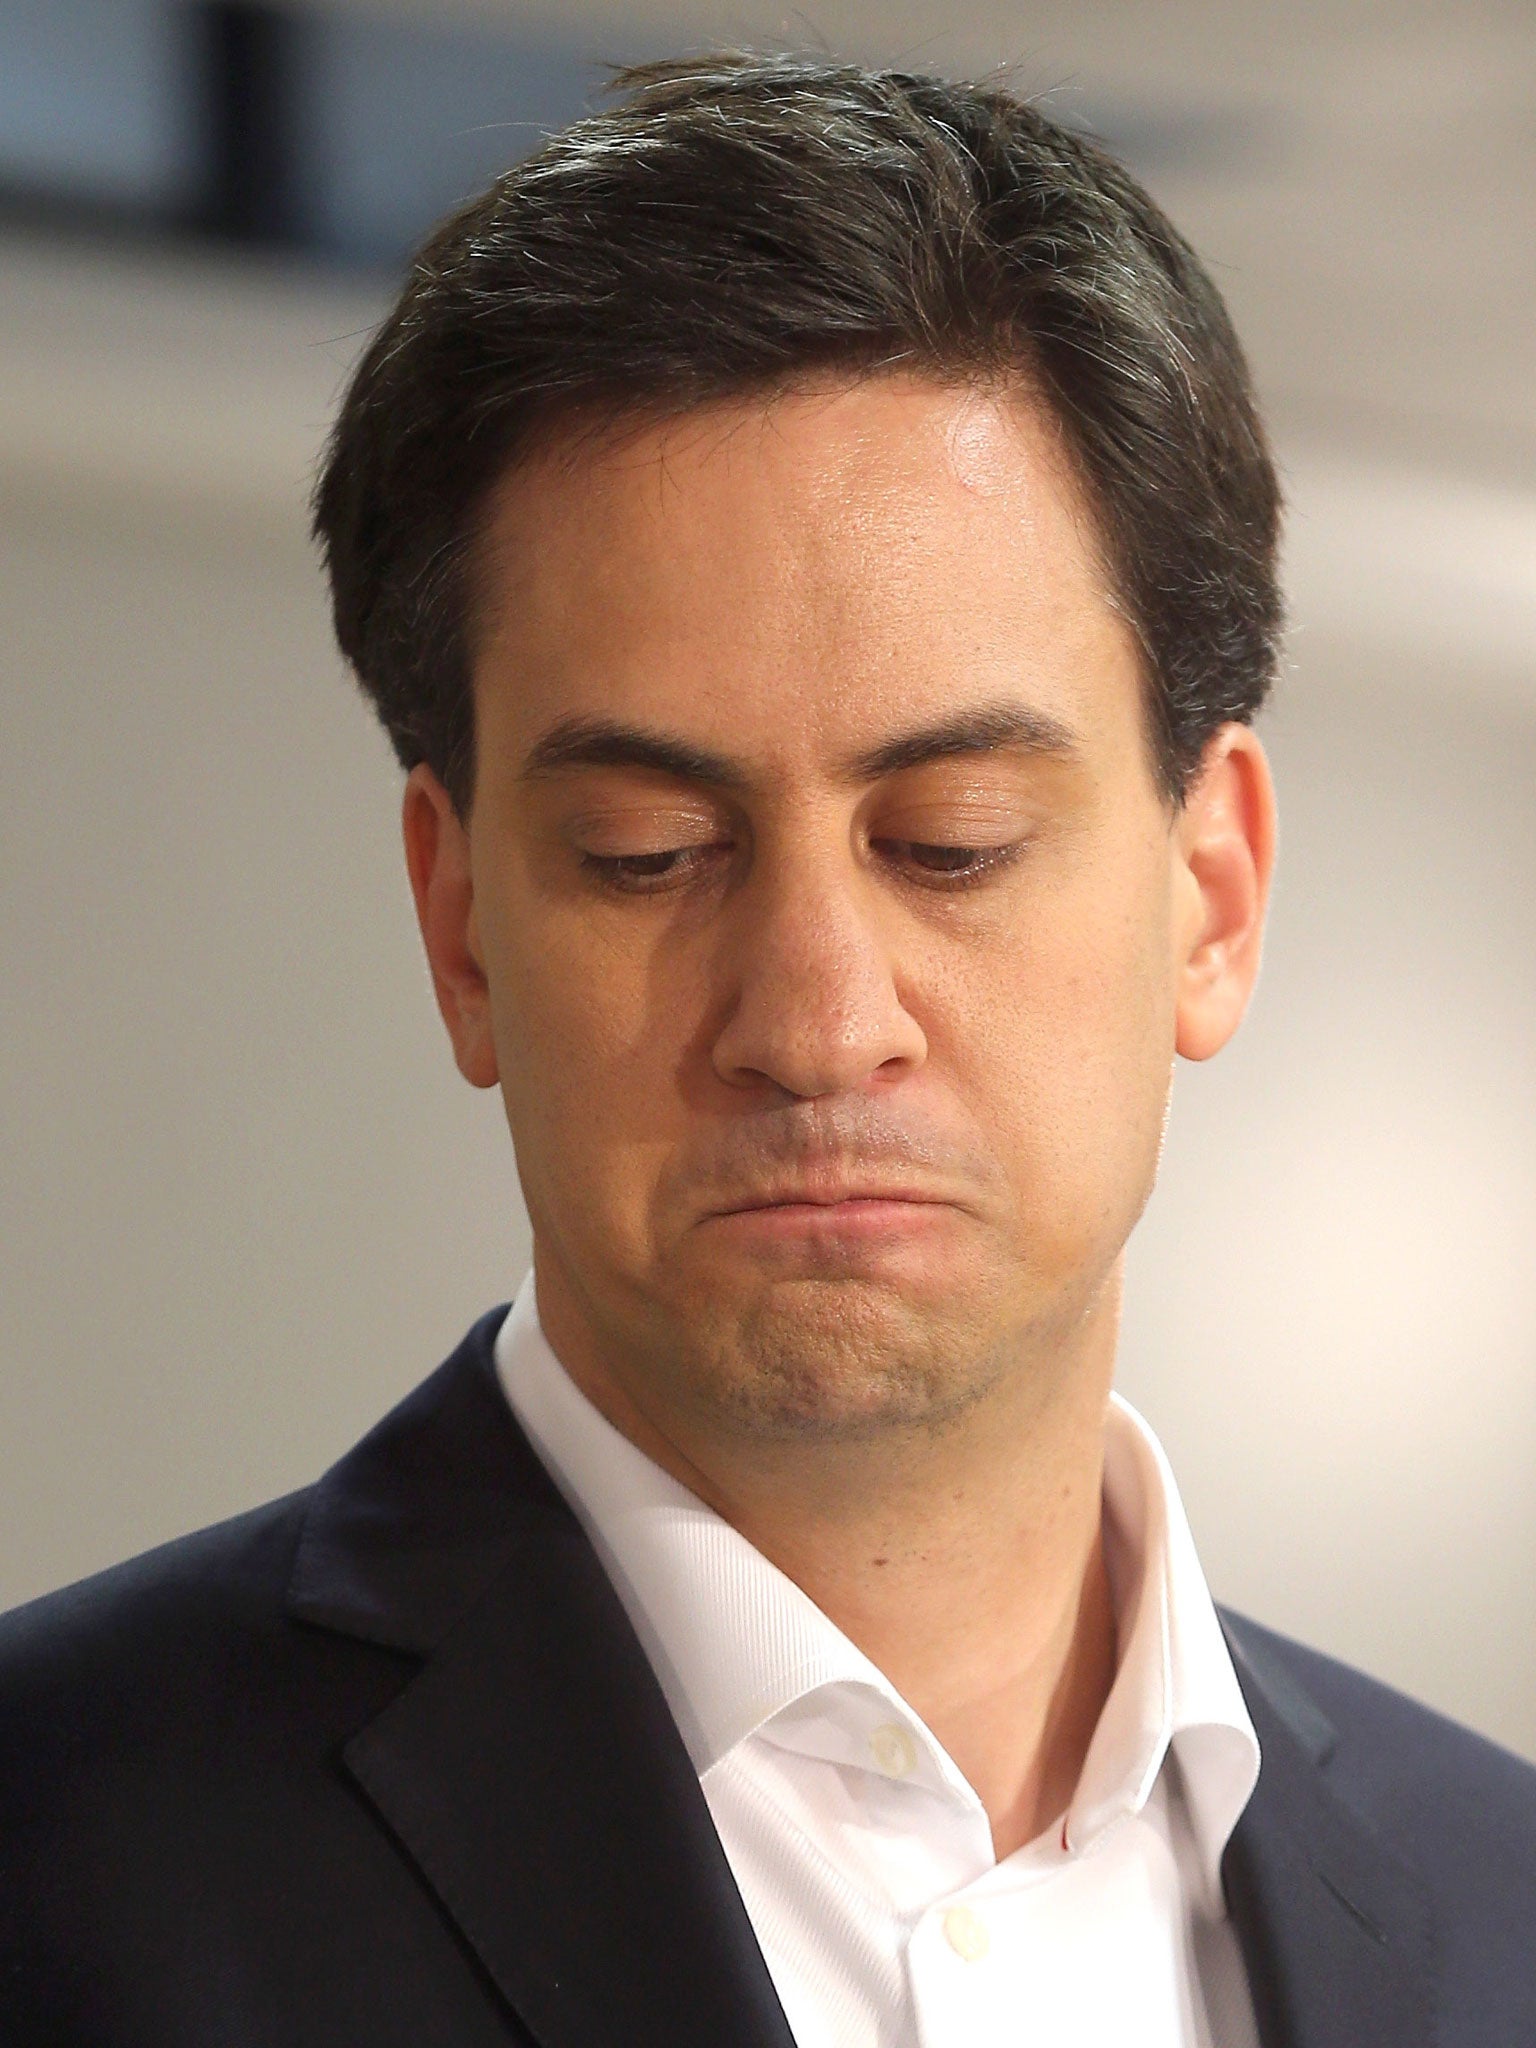 Ed Miliband had referred the controversy over elected candidates to Scottish police